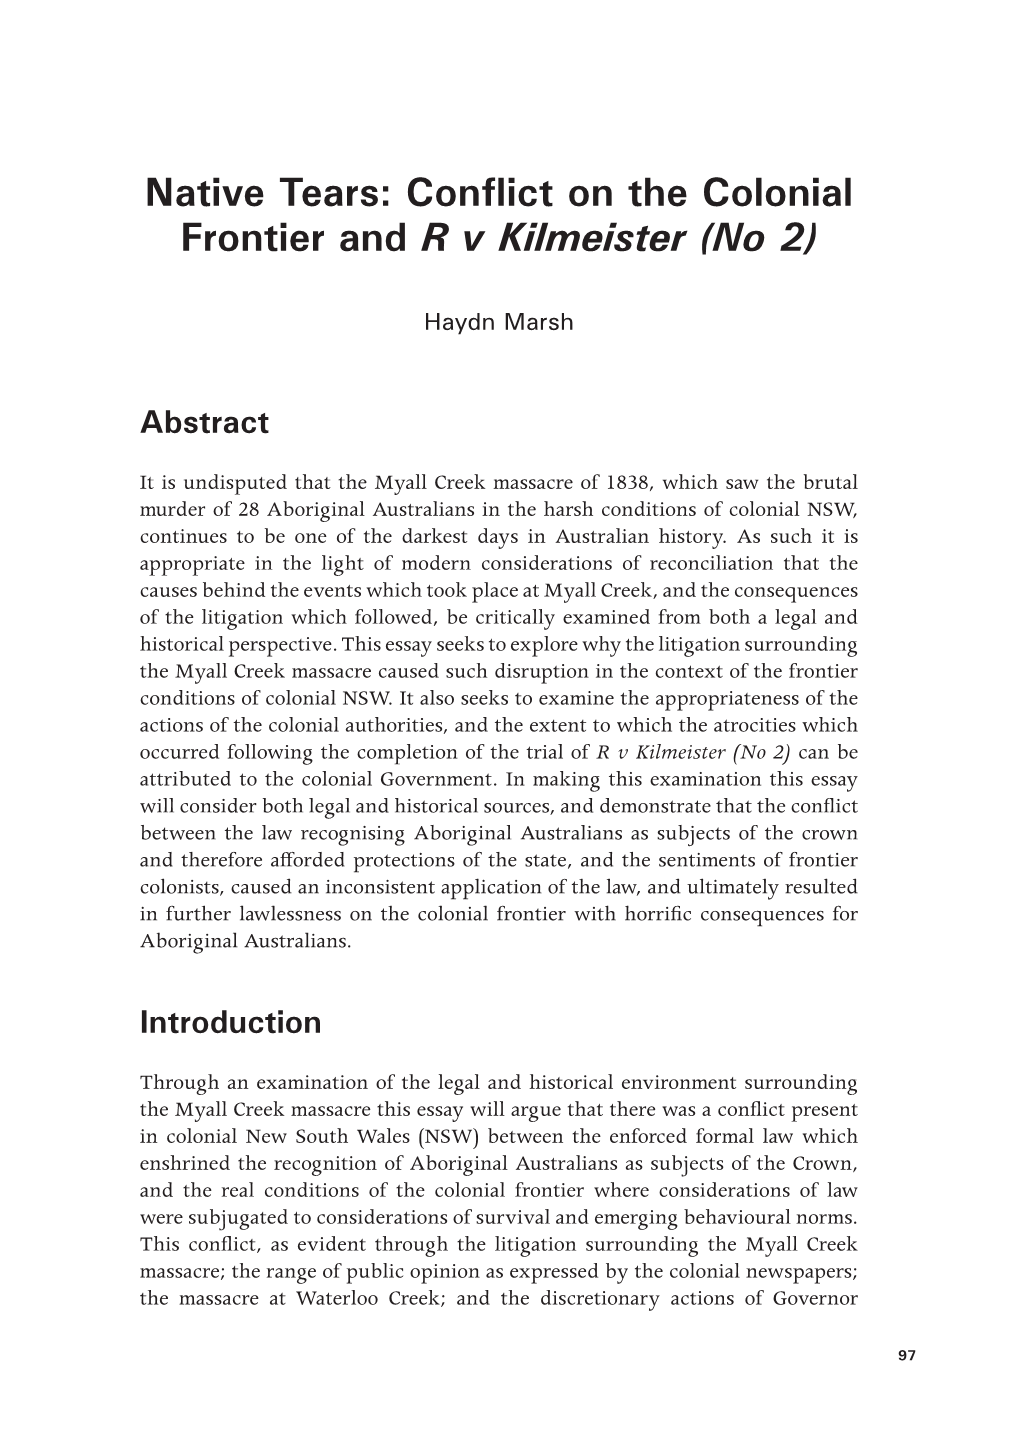 Conflict on the Colonial Frontier and R V Kilmeister (No 2)